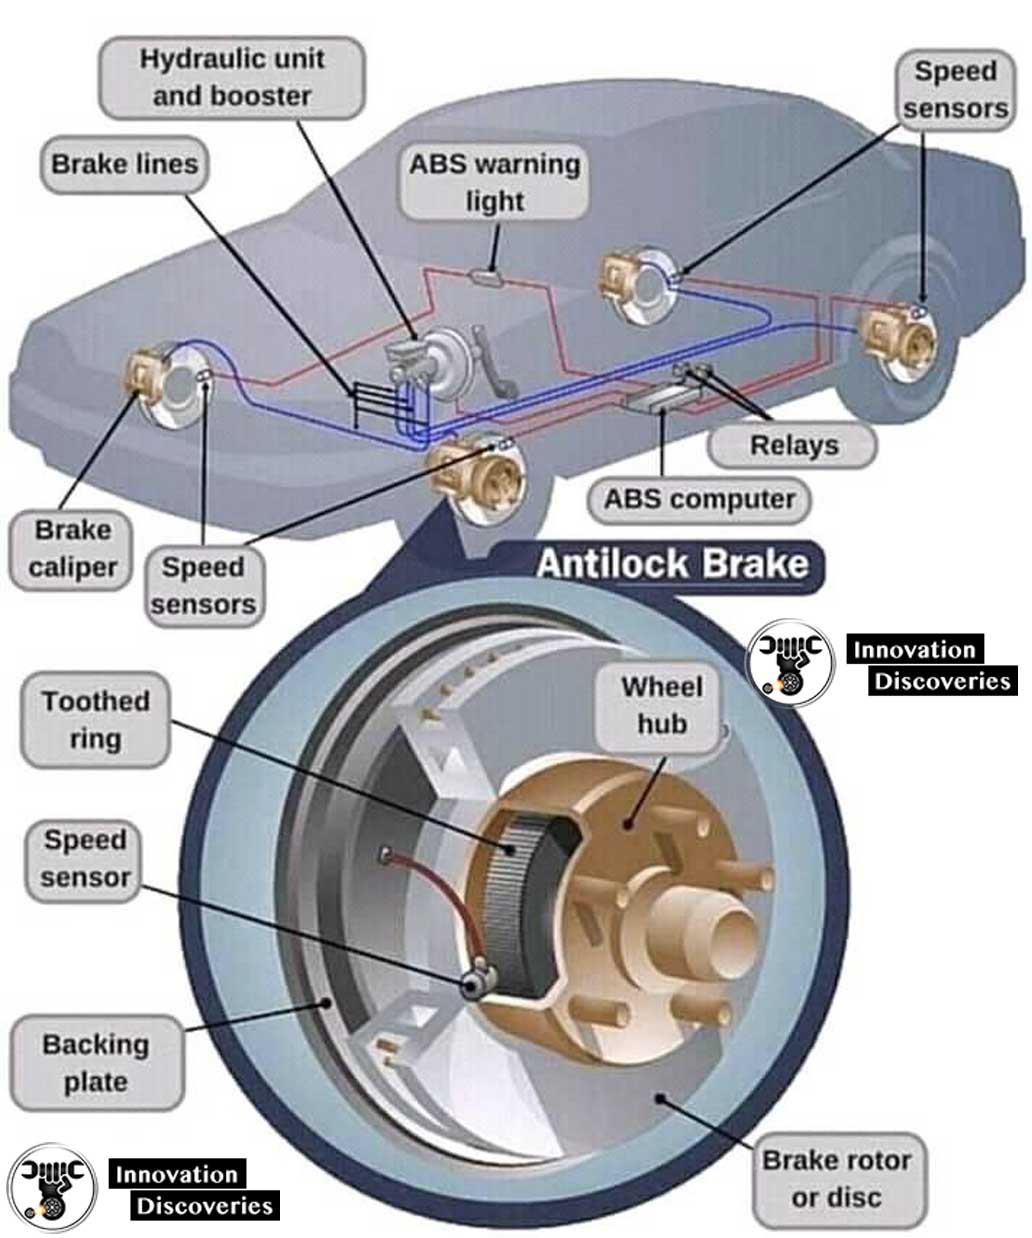 ANTILOCK BRAKING SYSTEM (ABS) COMPONENTS, TYPES AND